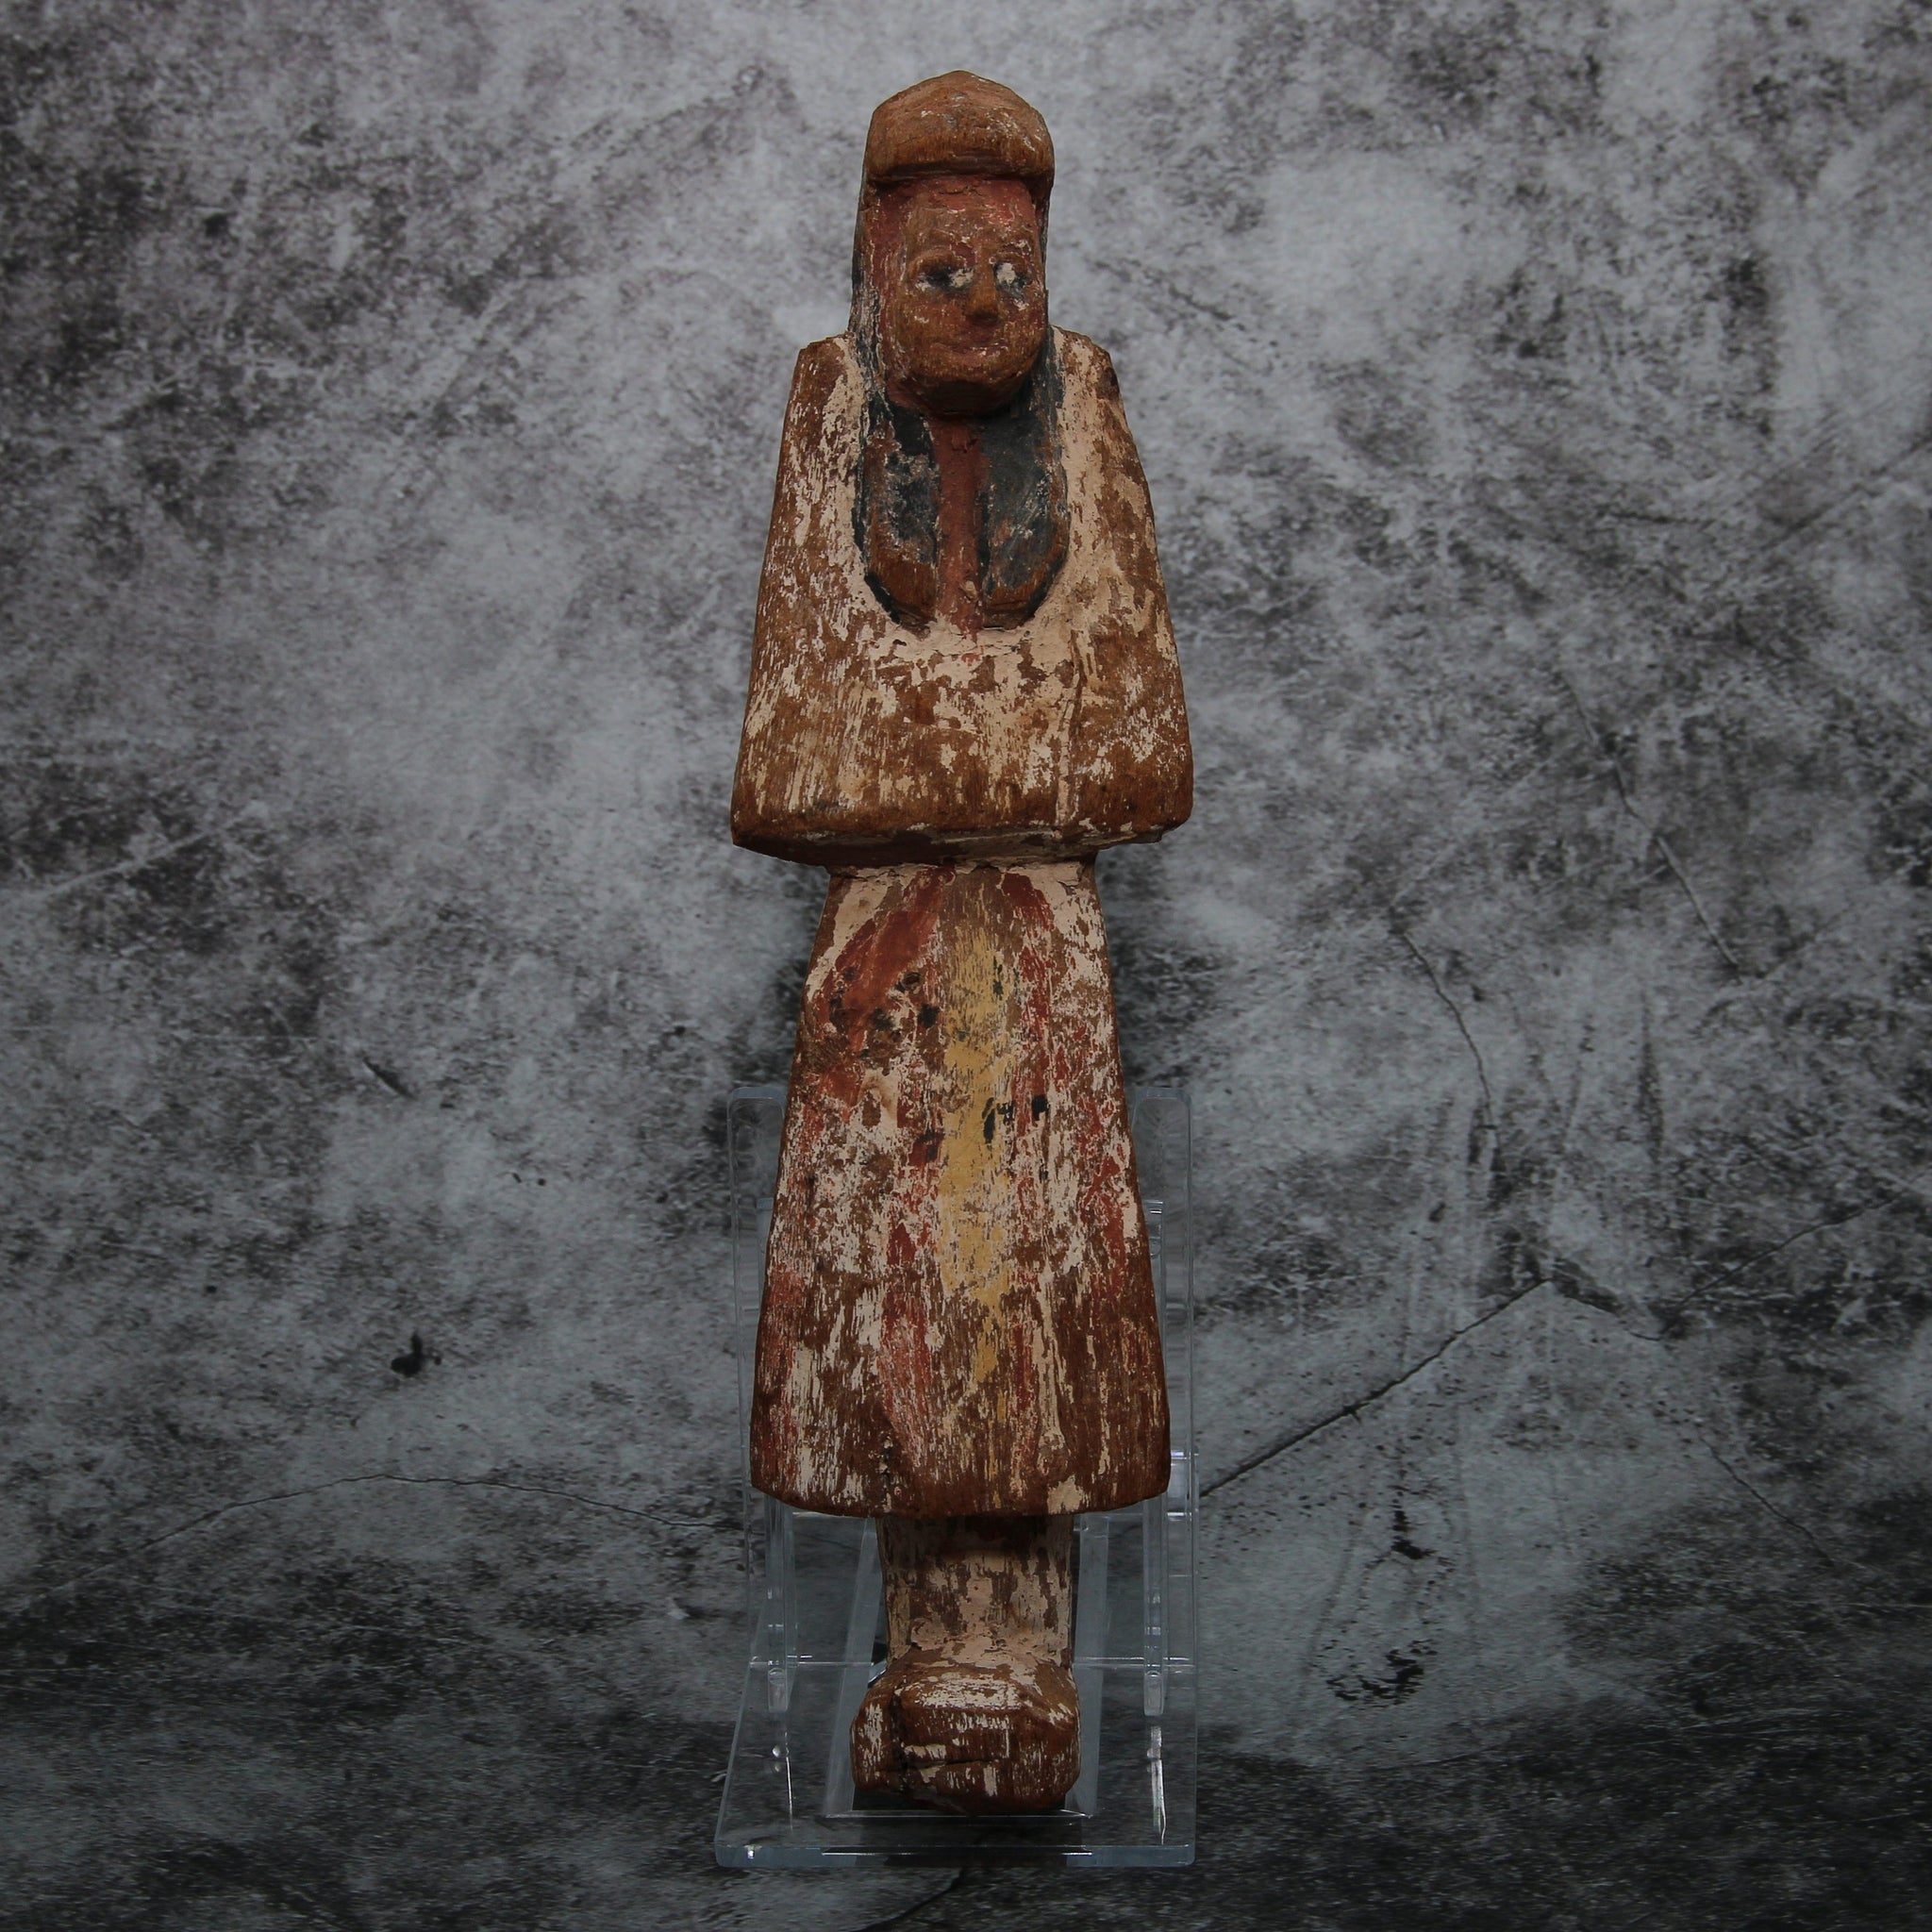 A wooden carved overseer shabti figure | Egypt, New Kingdom, 19th Dynasty, c. 1292-1189 BC